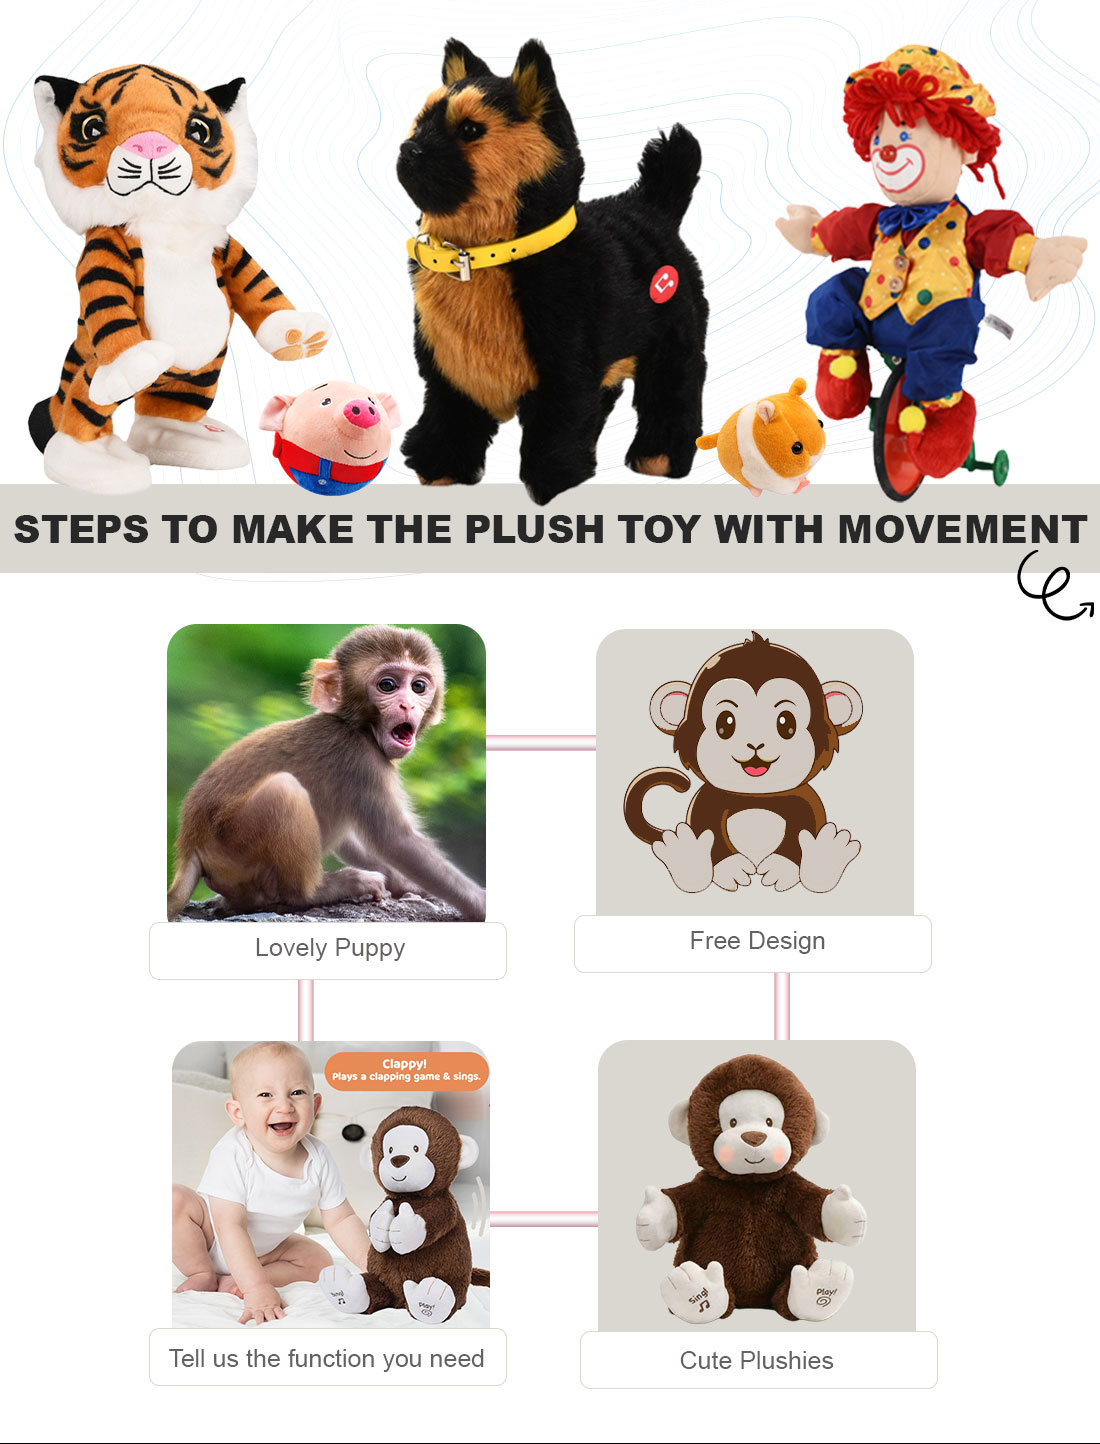 how to build dancing plush toy for kids